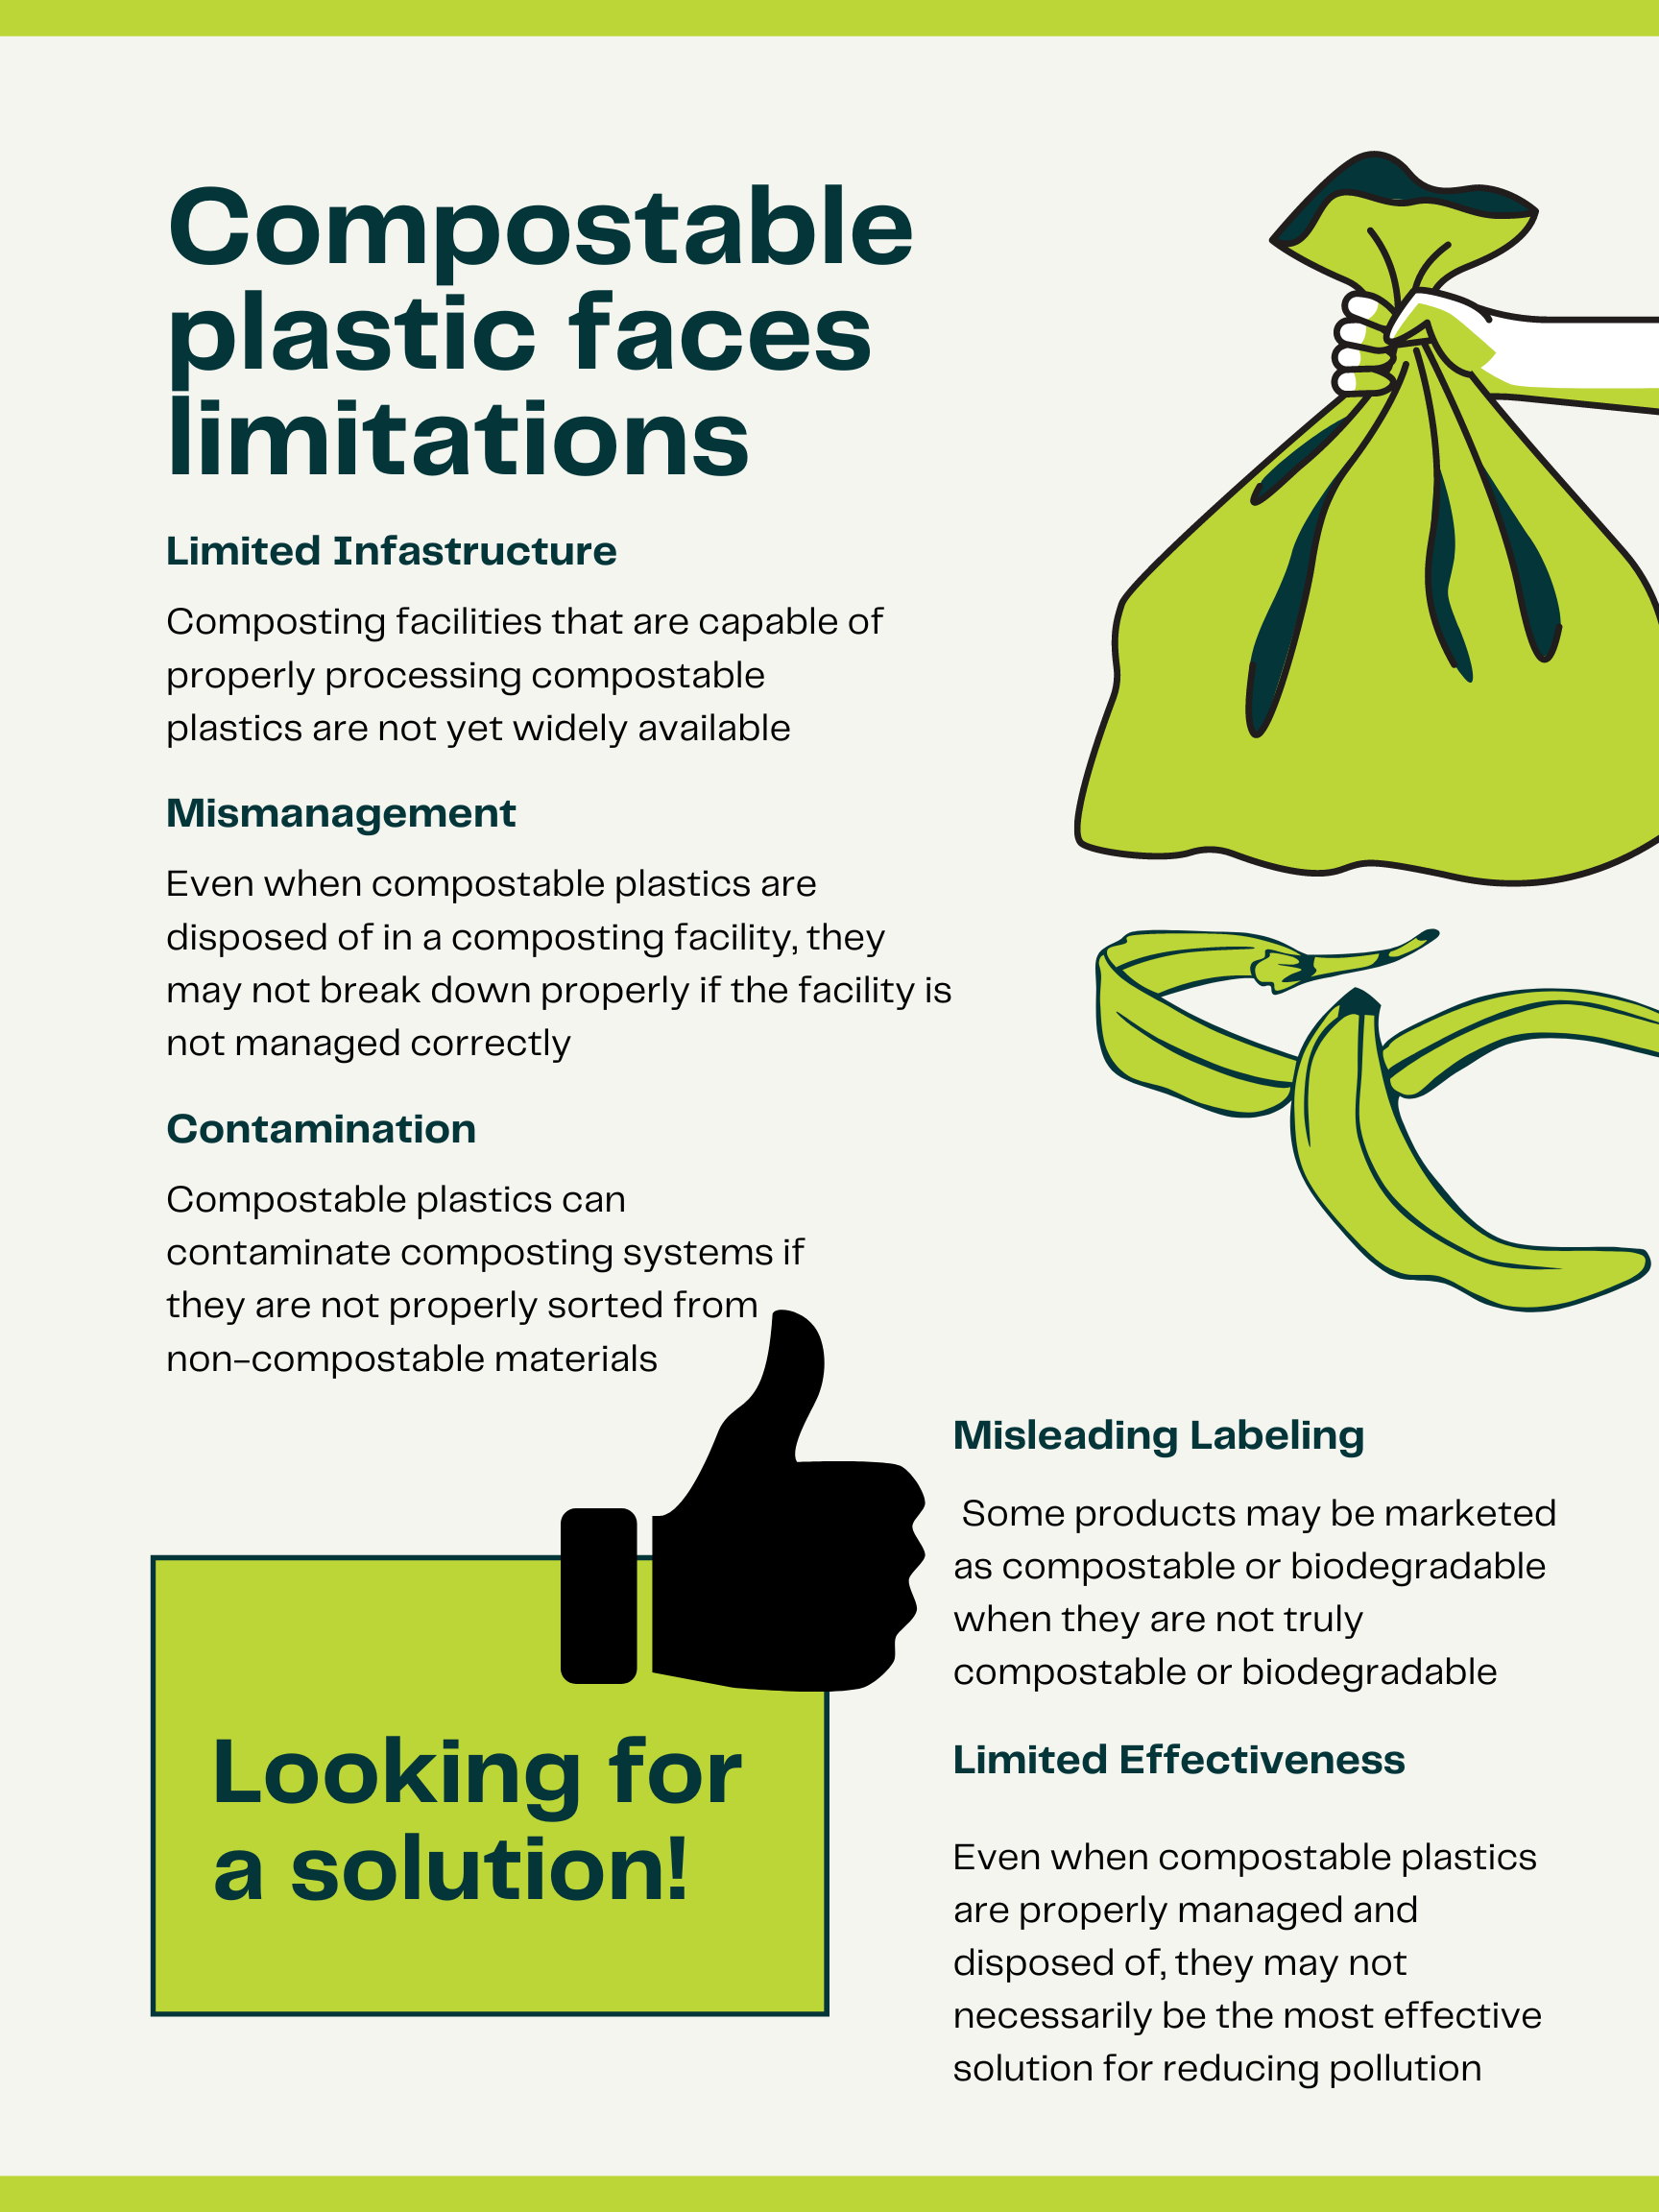 How compostable plastic leads to limited choices when it comes to it's disposal 